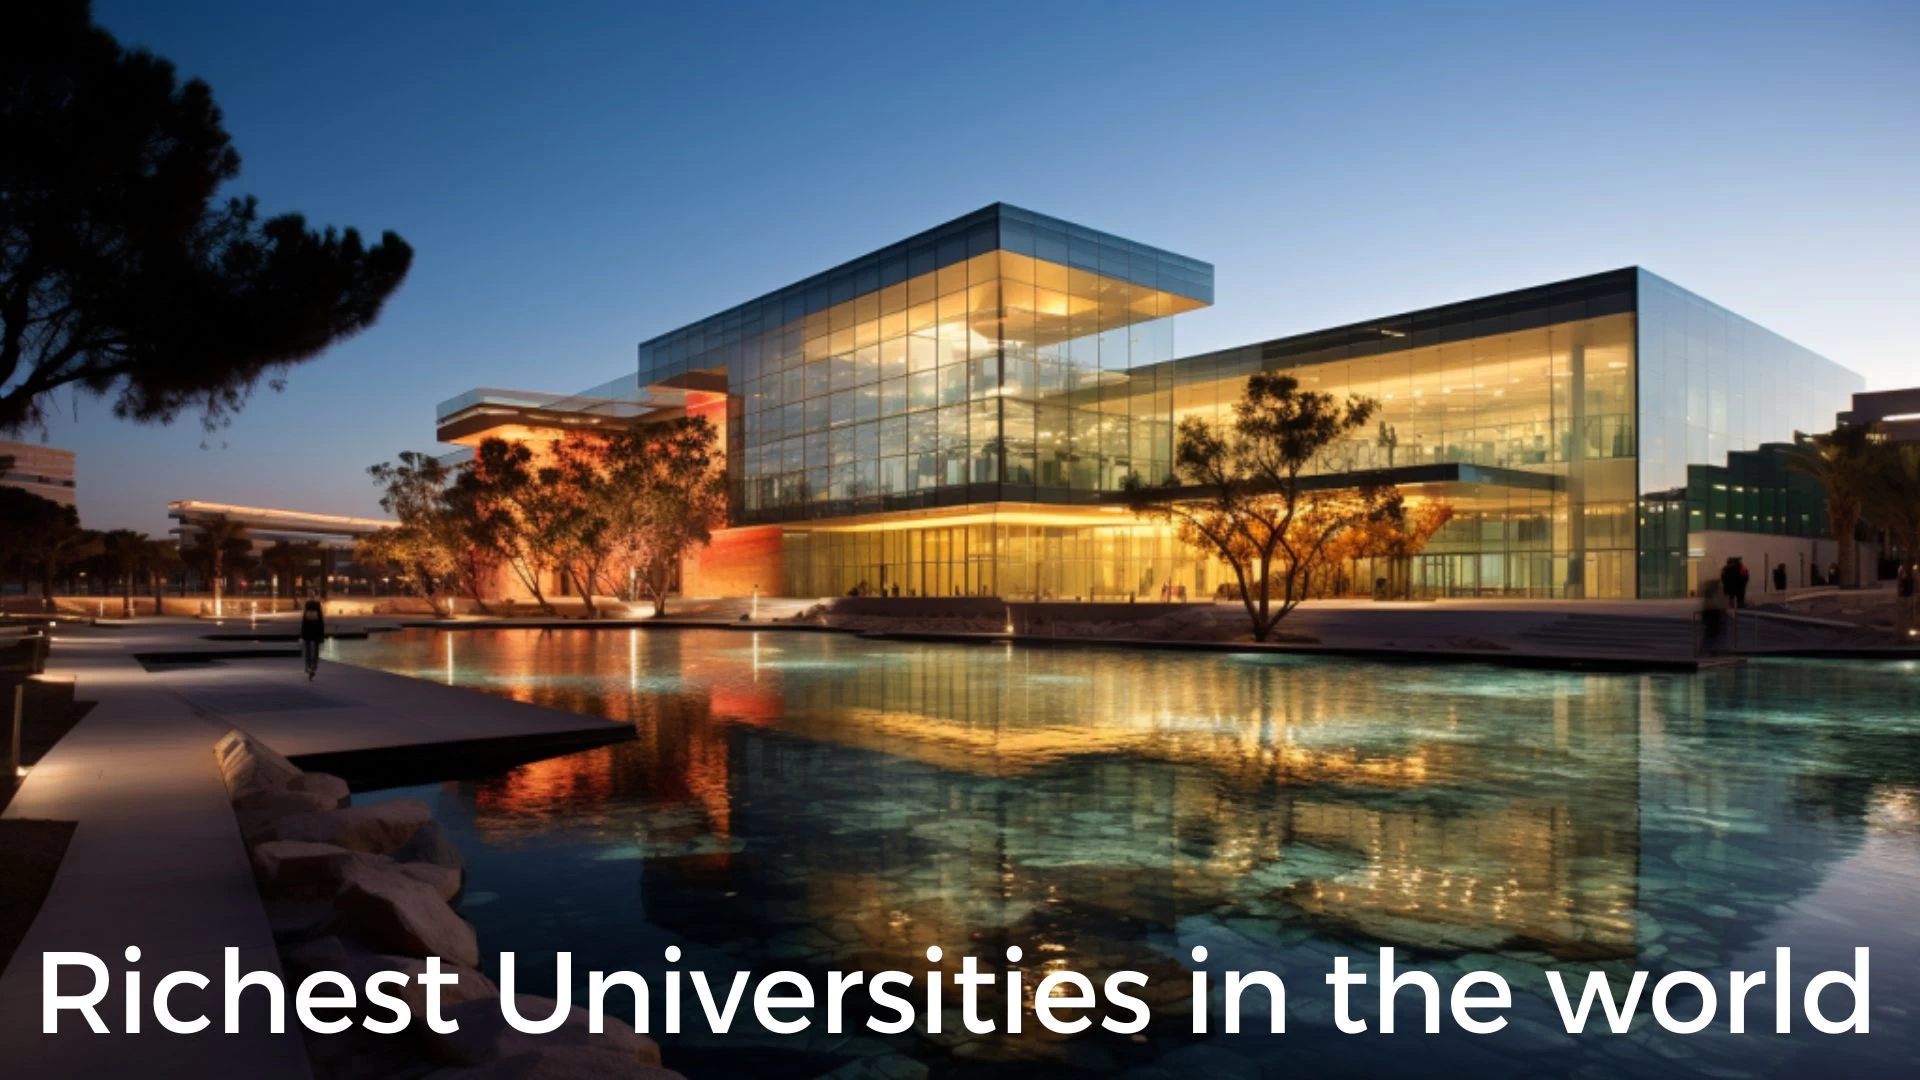 Richest Universities in the World - Top 10 Ranked